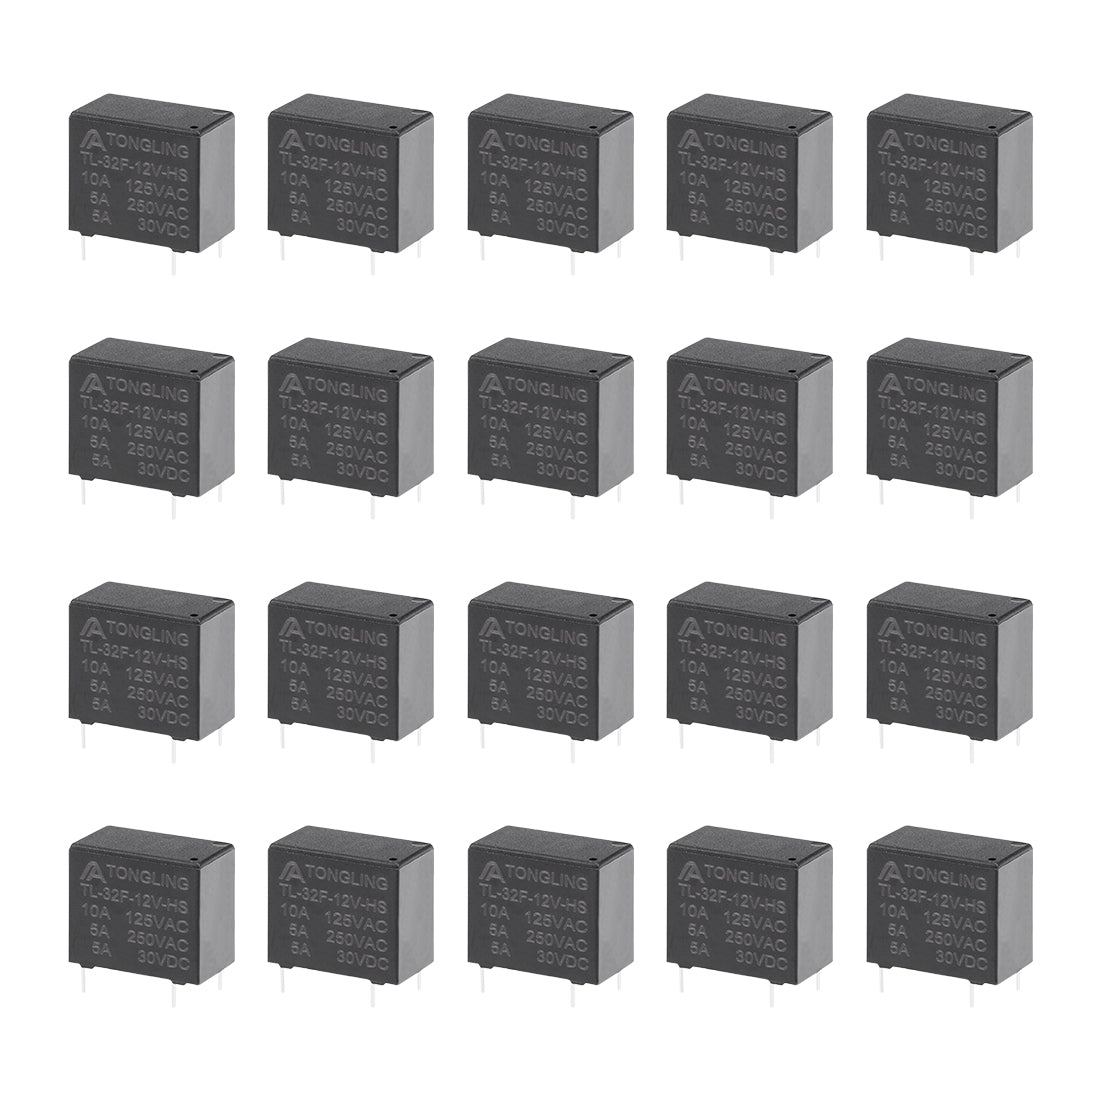 uxcell Uxcell 20 Pcs TL-32F-12V-HS DC 12V Coil SPST 4 Pin PCB Electromagnetic Power Relay